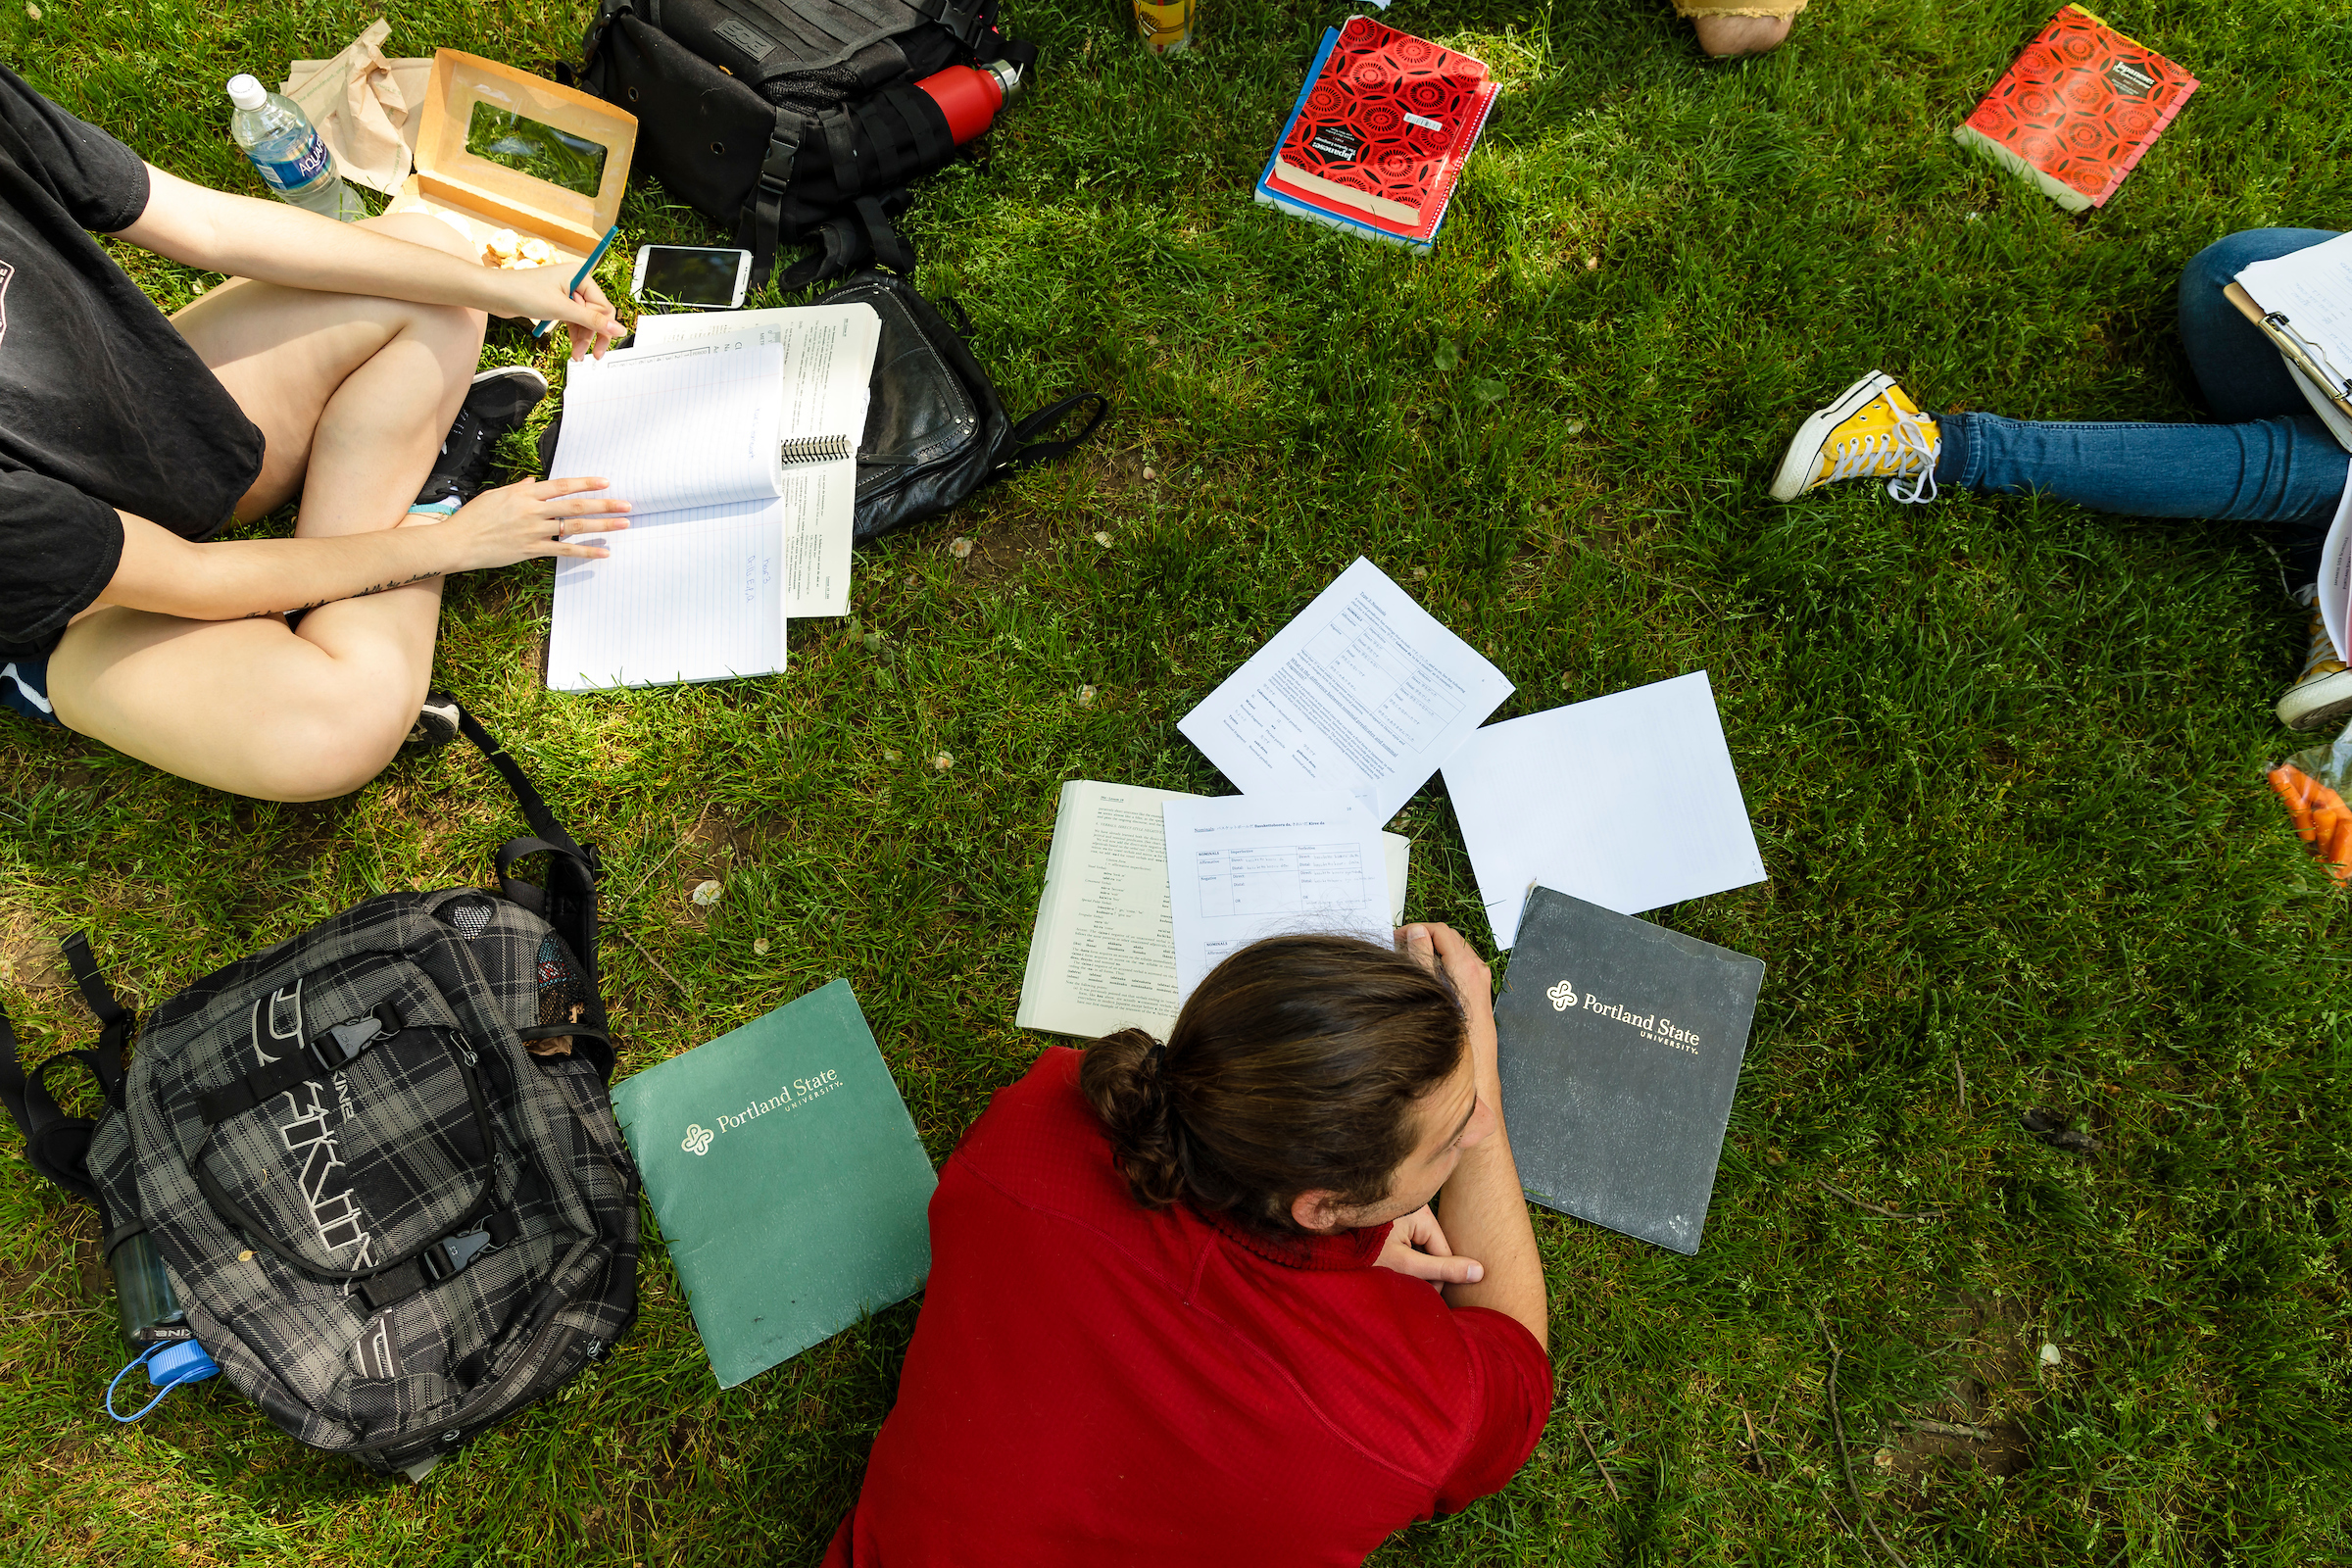 Students studying on grass in Park Blocks